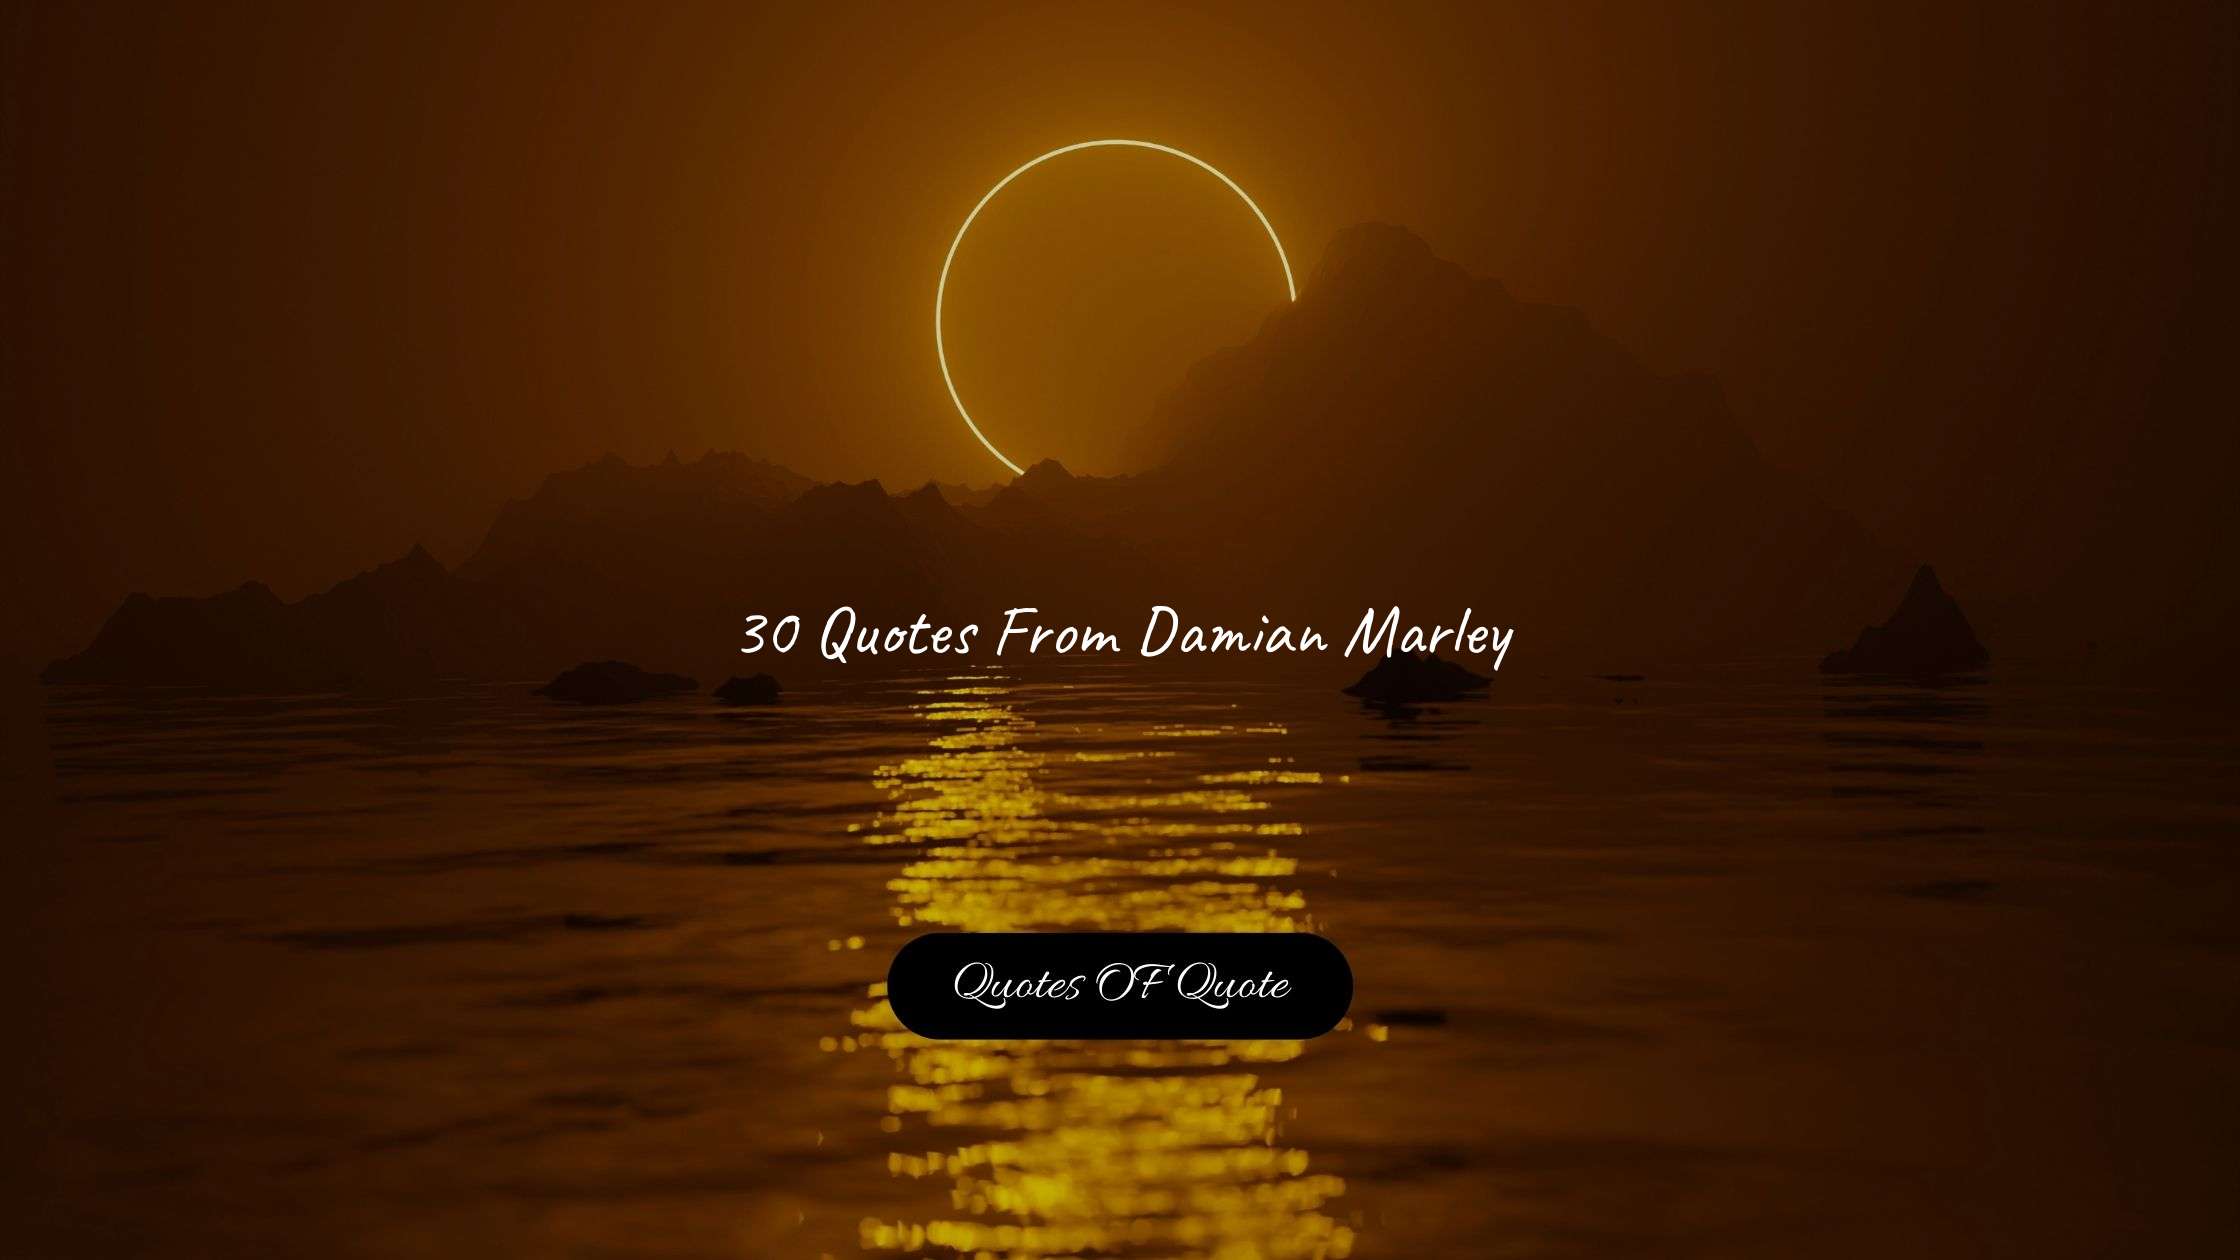 30 Quotes From Damian Marley